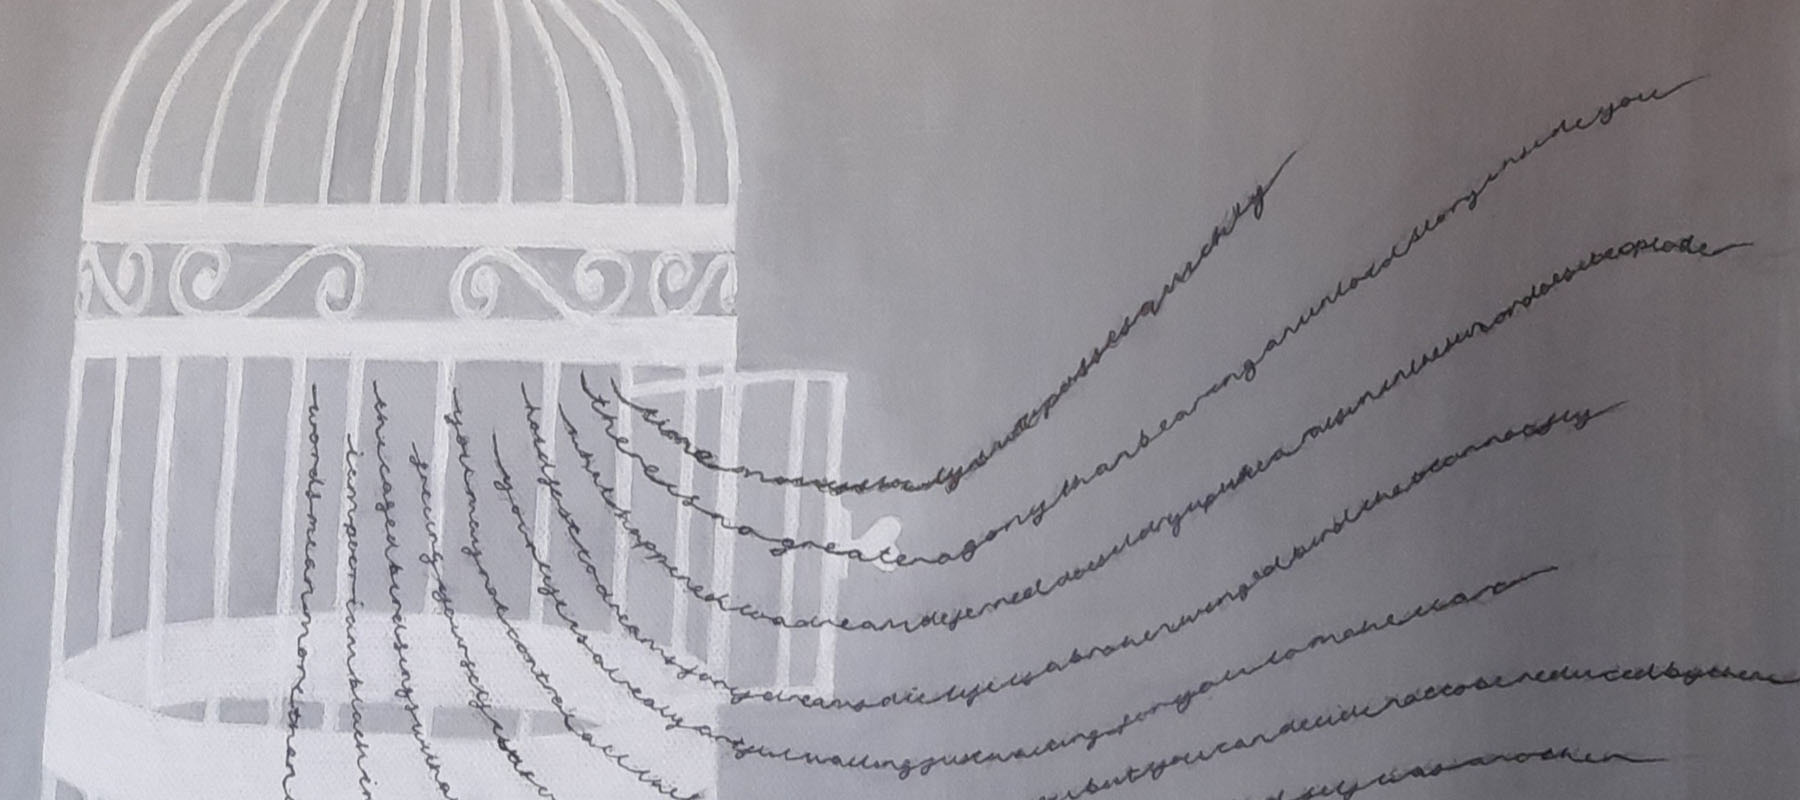 Monochrome paining of birdcage with lines of words escaping